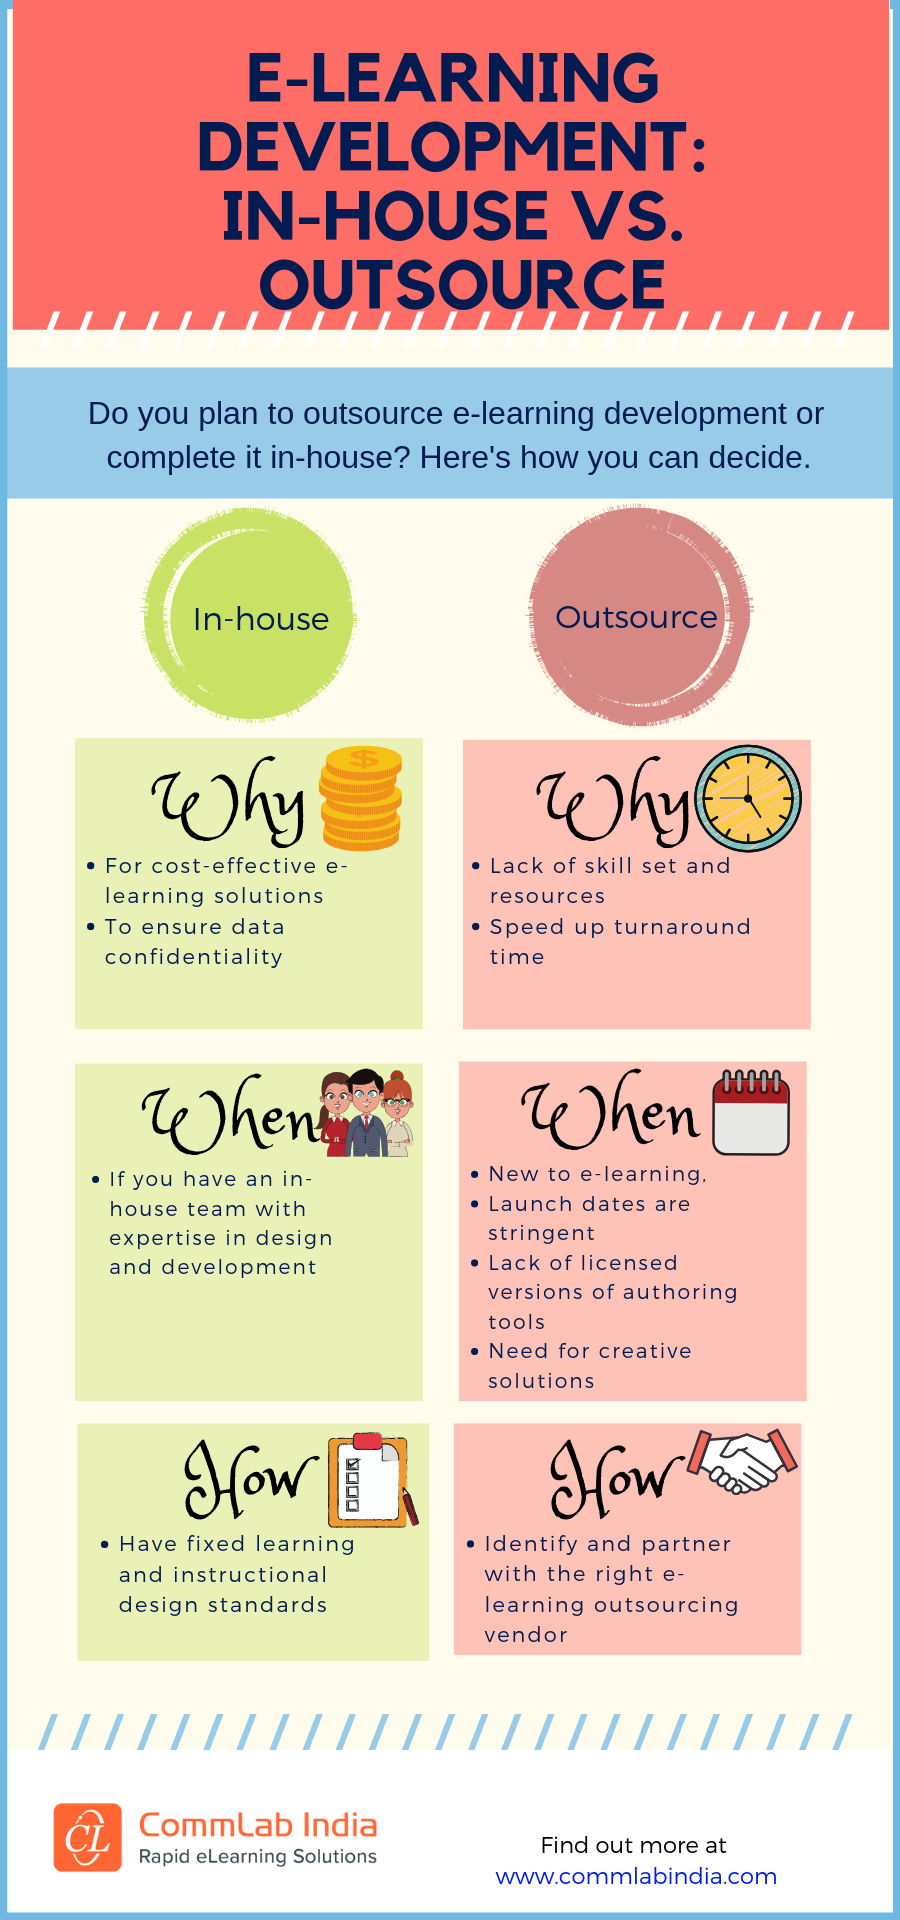 Elearning Development: In-house Vs. Outsource [Infographic]